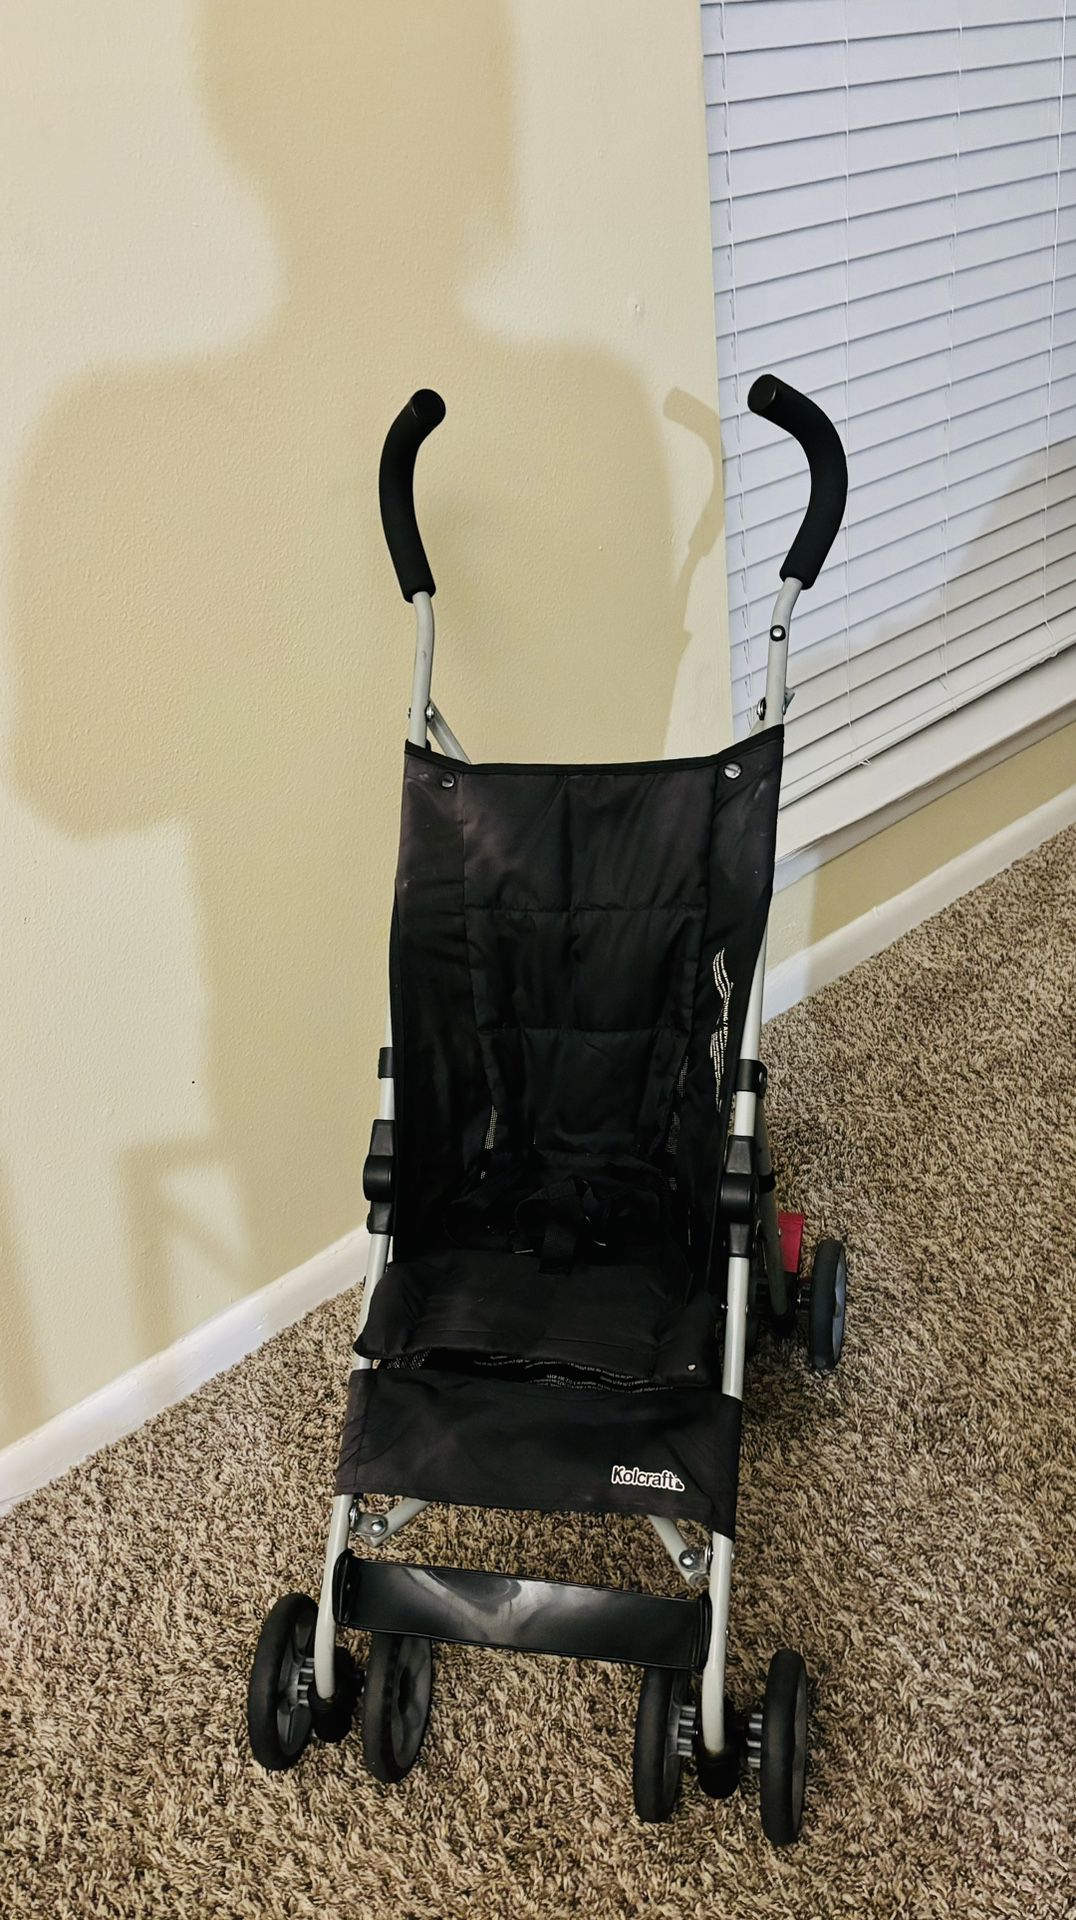 Kolcrafts baby stroller new in condition light weight easy to fold